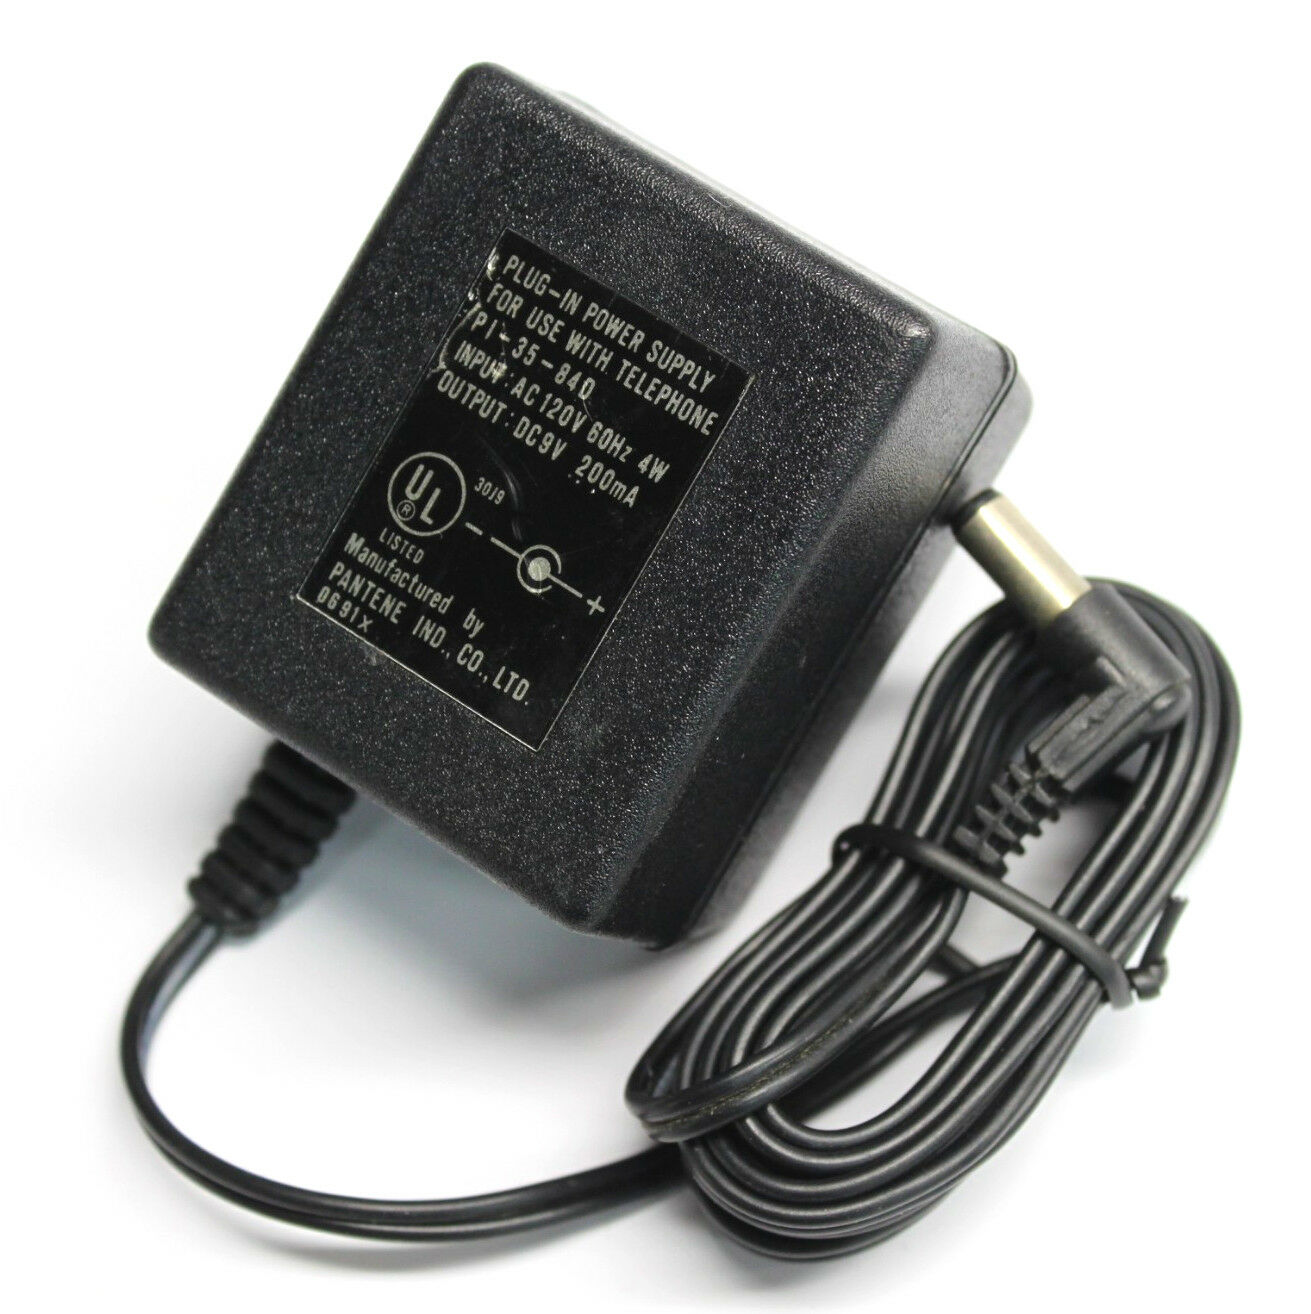 Pantene PI-35-84D Plug-In Power Supply AC Adapter Output DC 9V 200mA Brand: Pantene Type: Adapter MPN: Does Not